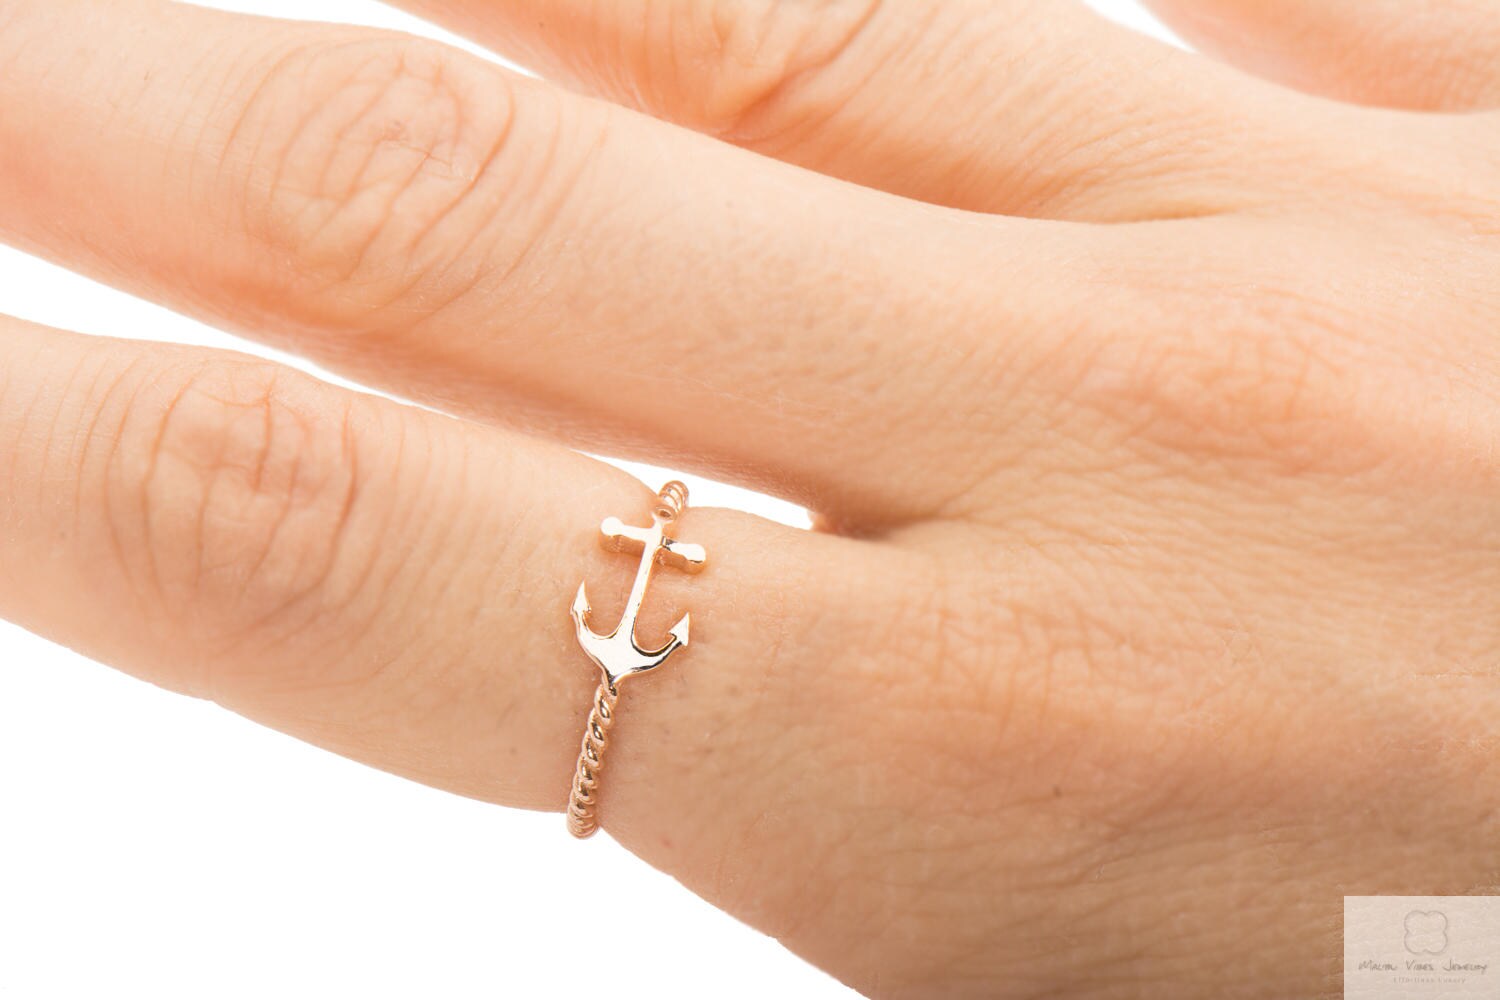 14k Rose Gold Anchor Ring with Braided twisted rope band